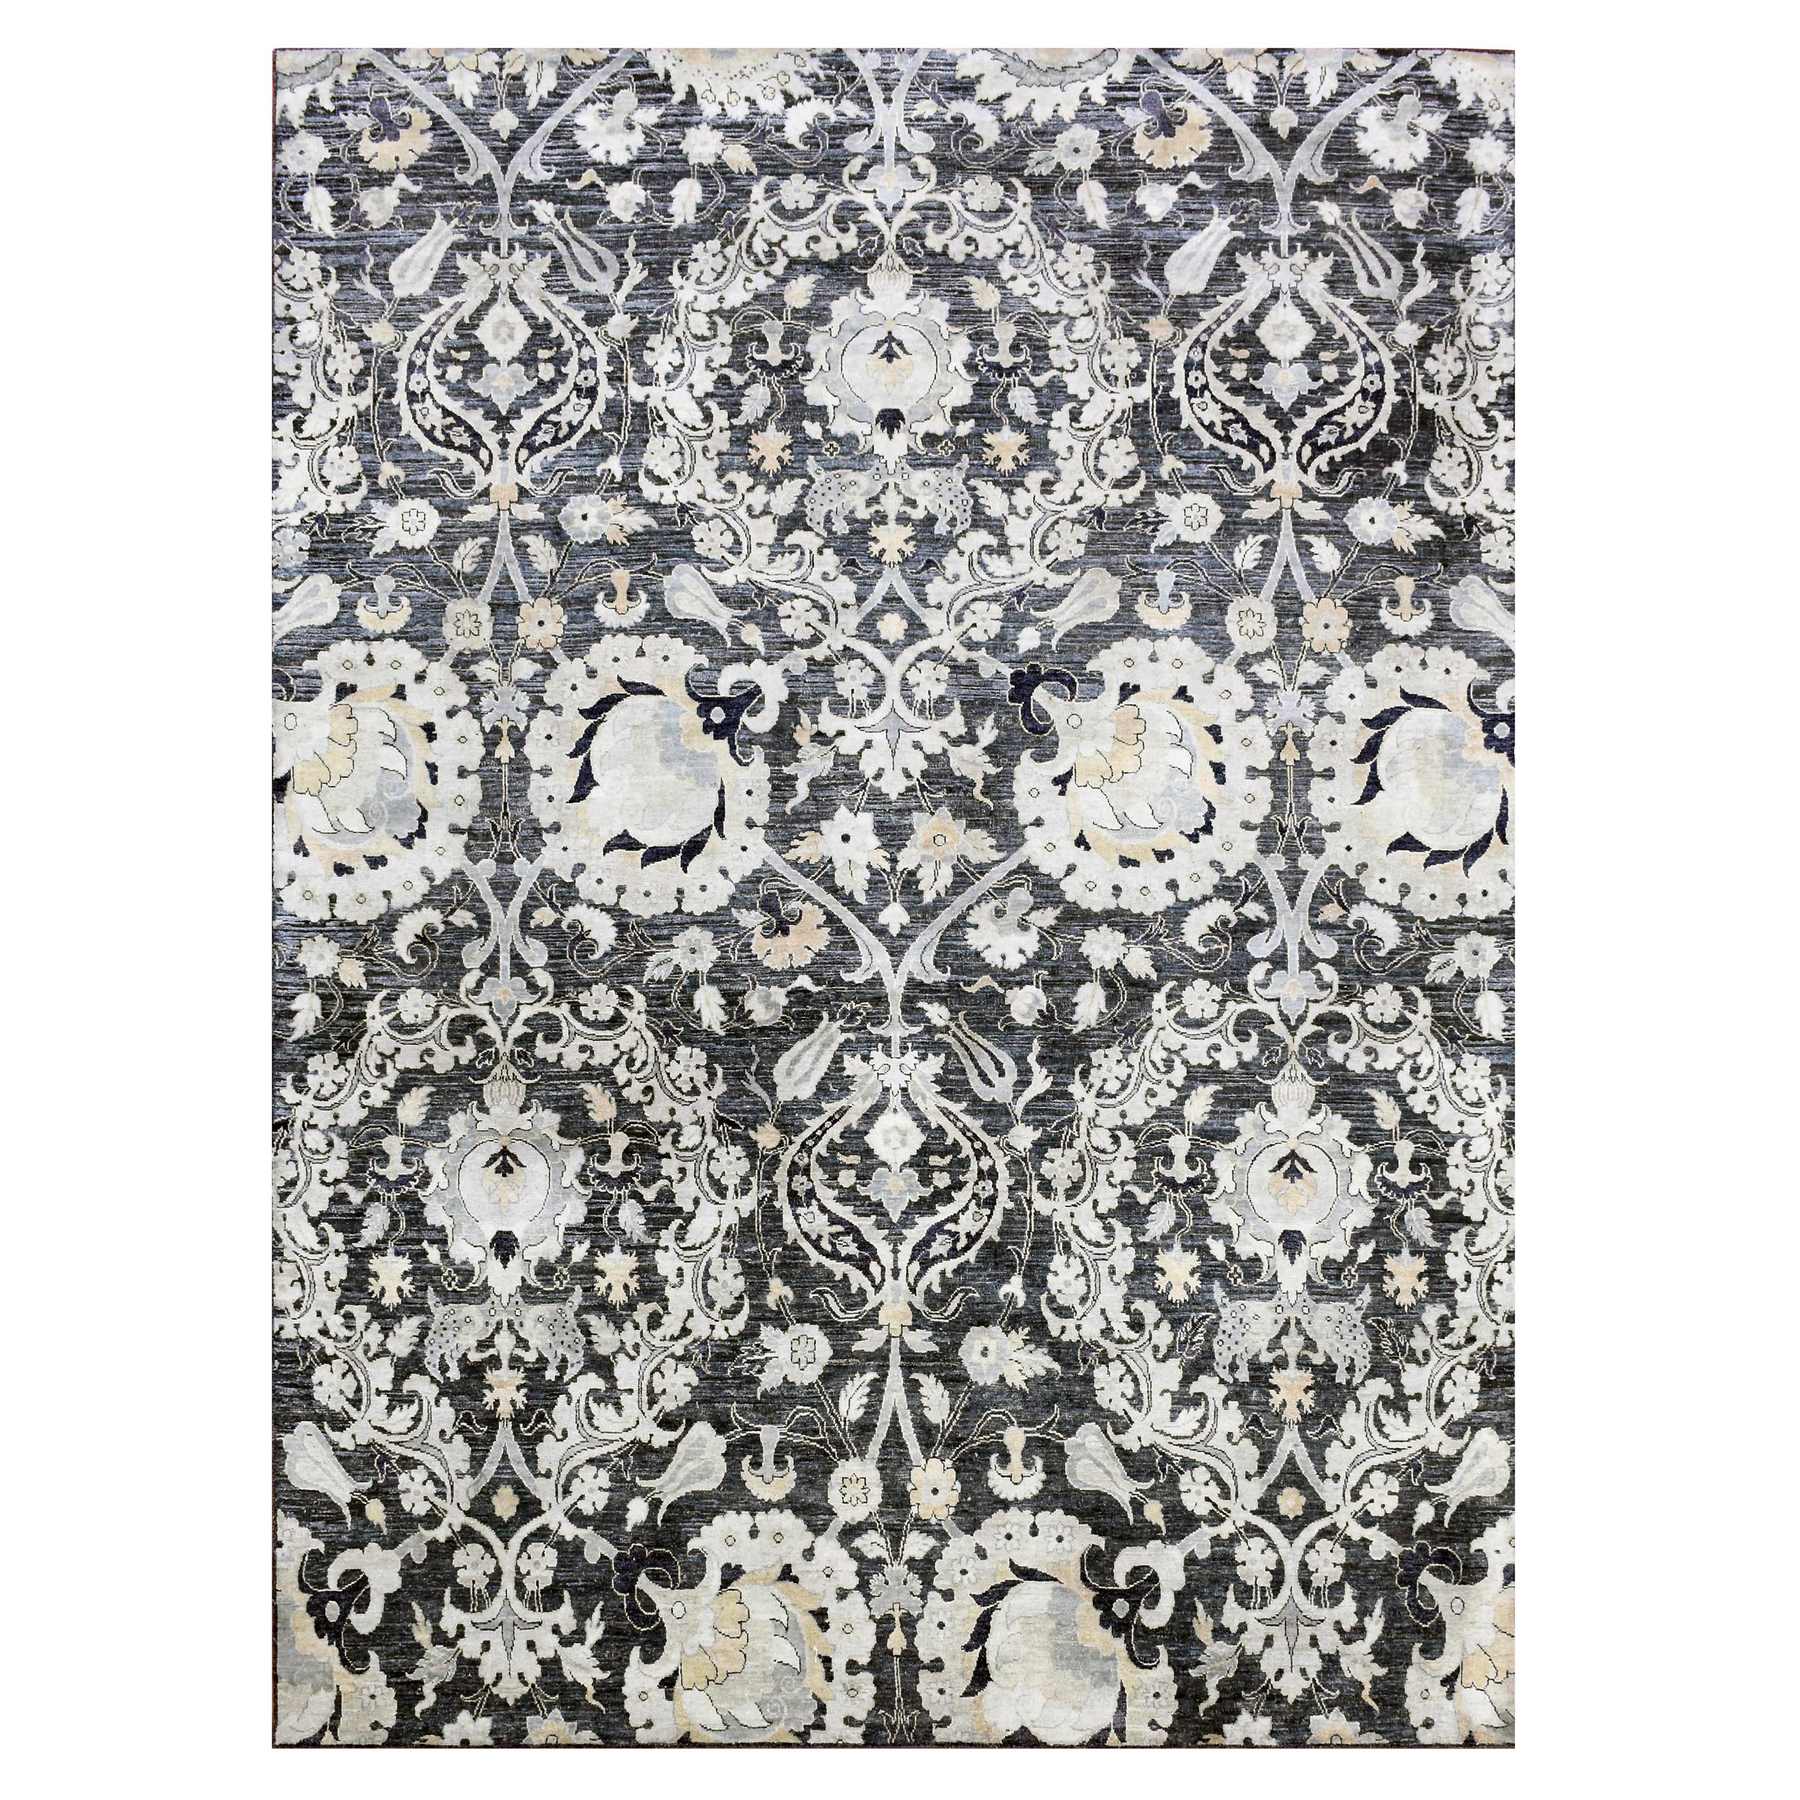 8'2"X10' Gray-Blue Tulip and Large Blossom Design Pure Silk with Textured Wool Hand Woven Oriental Rug 